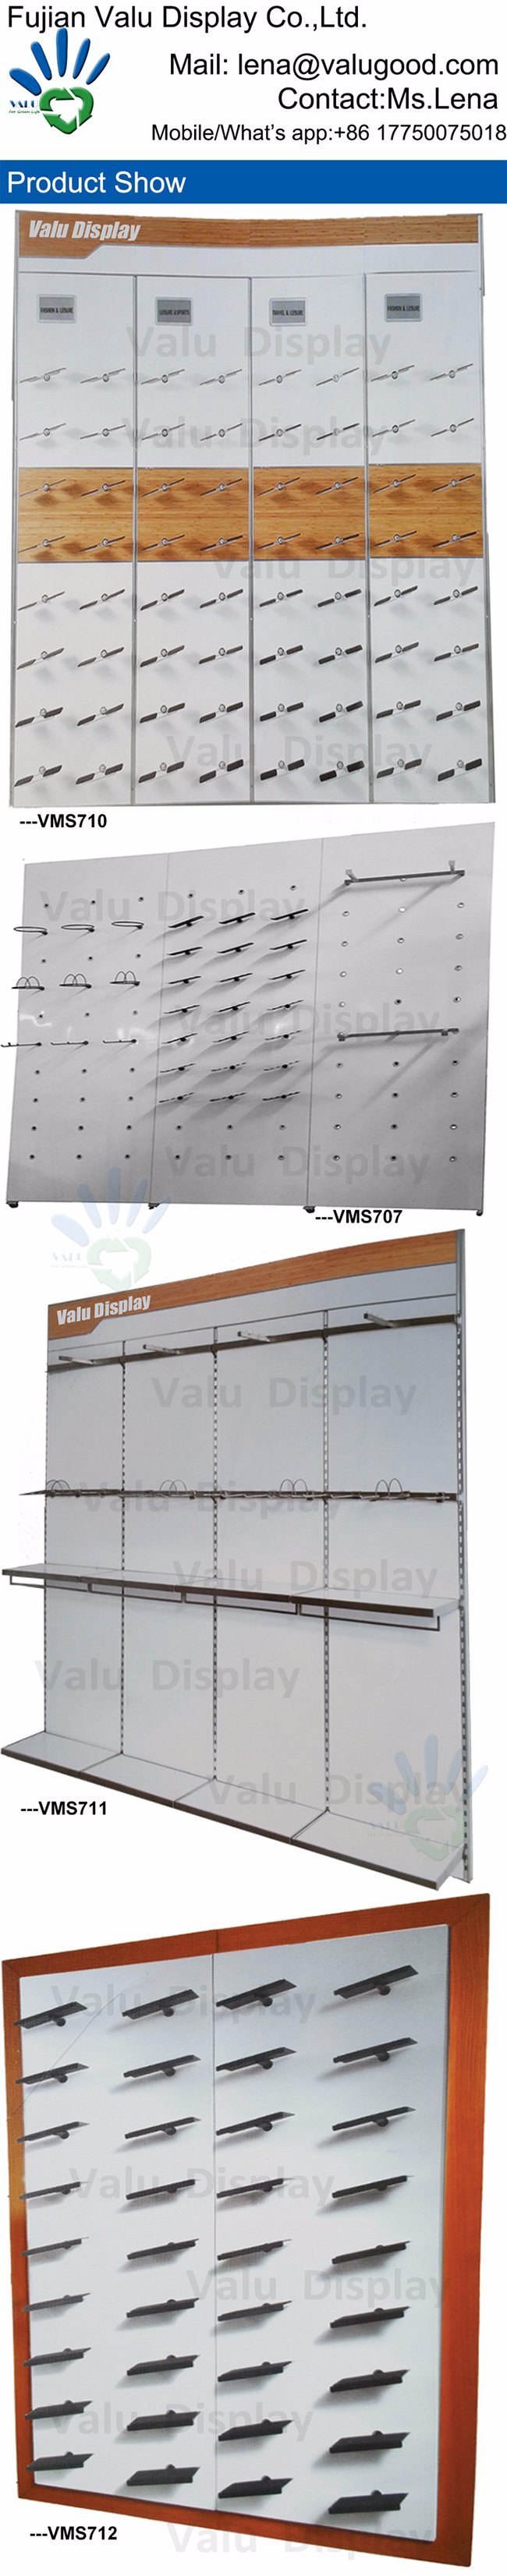 Custom Design Wall Mounted Equipment for Shoes Store Retail Displaying